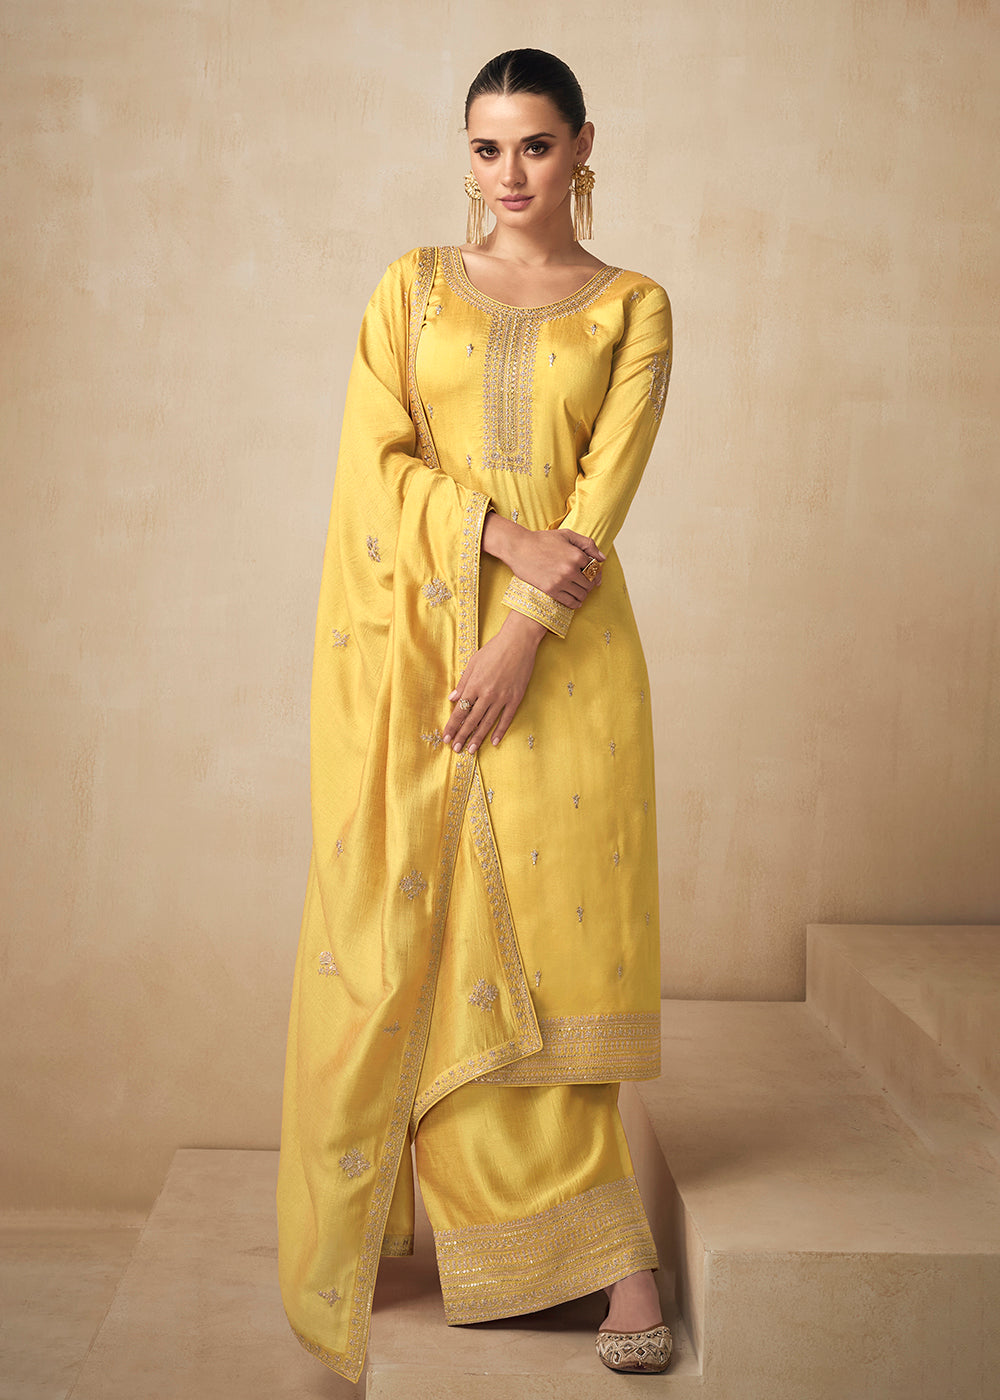 Buy Now Premium Silk Pretty Yellow Embroidered Straight Palazzo Salwar Suit Online in USA, UK, Canada, Germany, Australia & Worldwide at Empress Clothing.